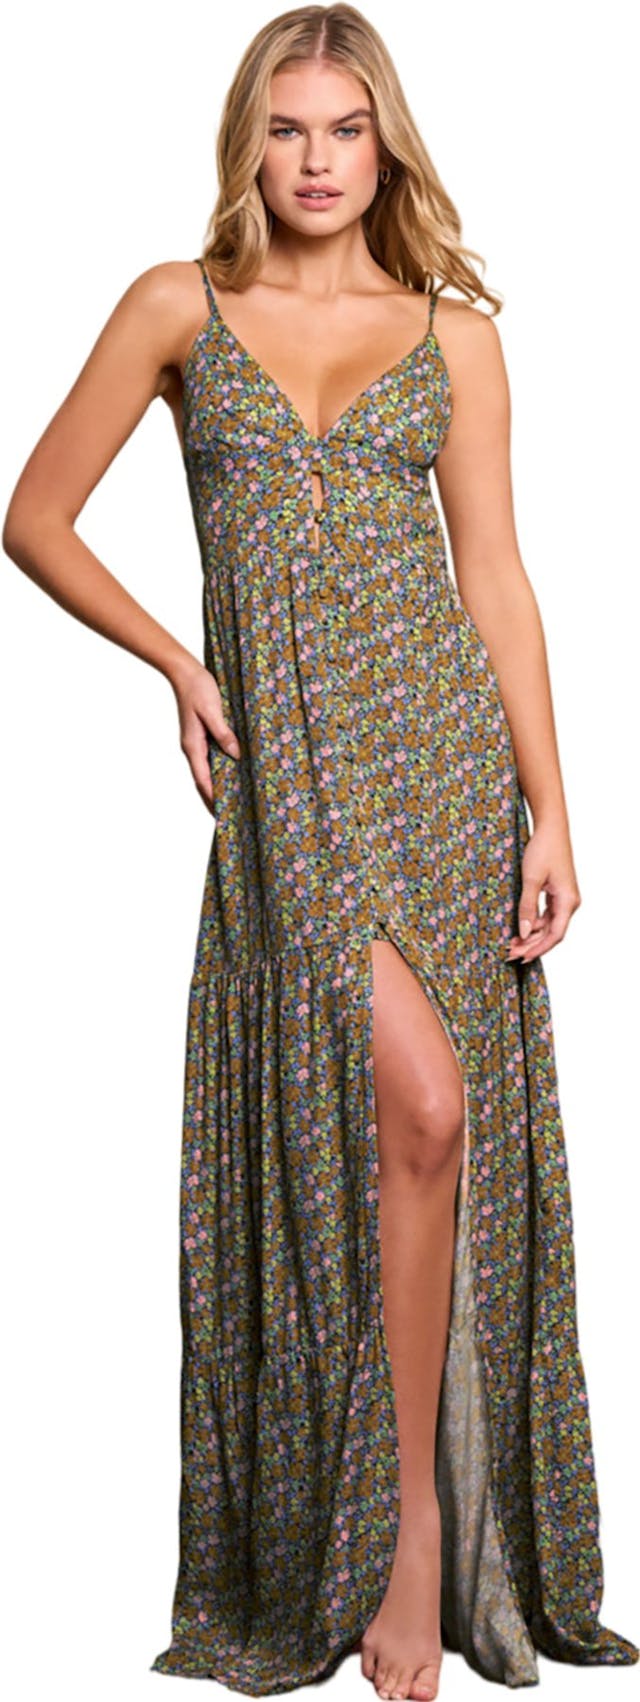 Product image for Sadie Blossom Long Dress - Women's